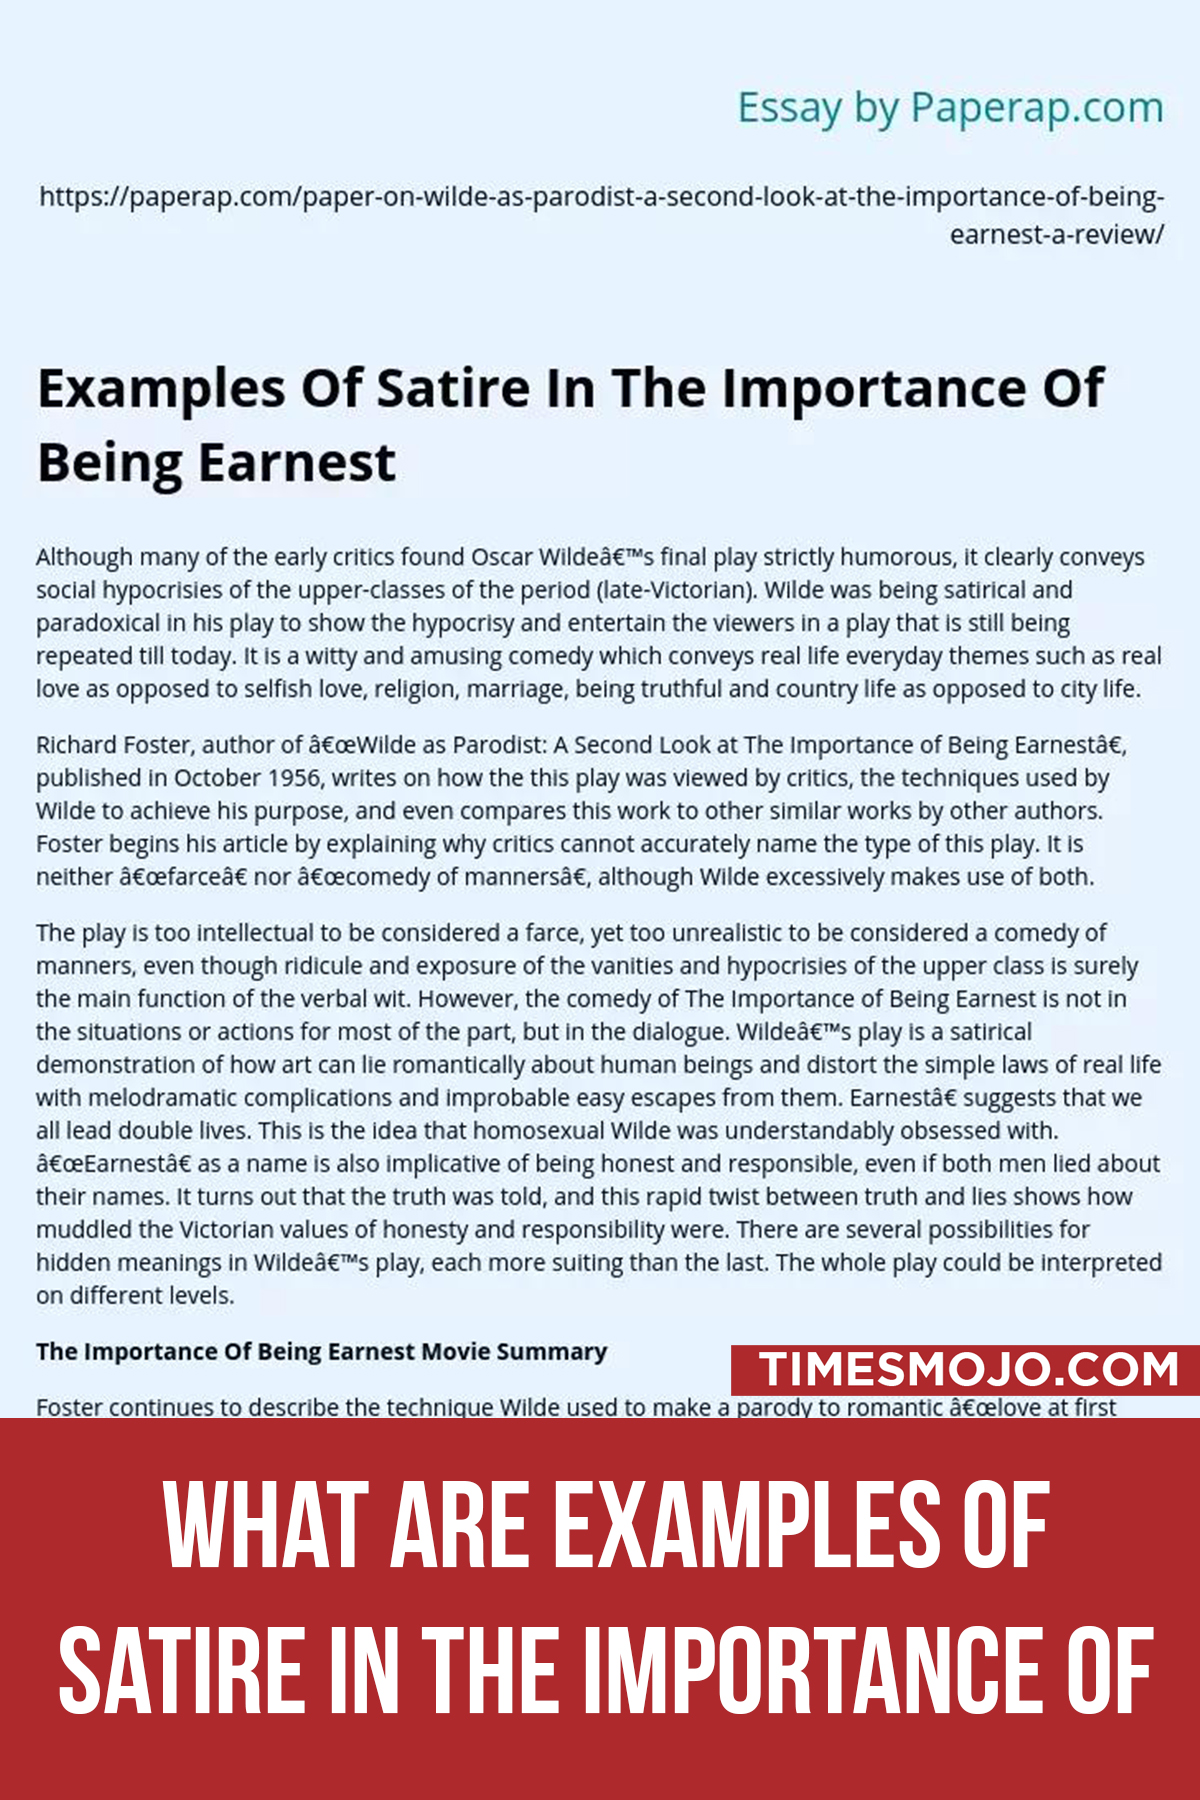 What Are Examples Of Satire In The Importance Of Being Earnest